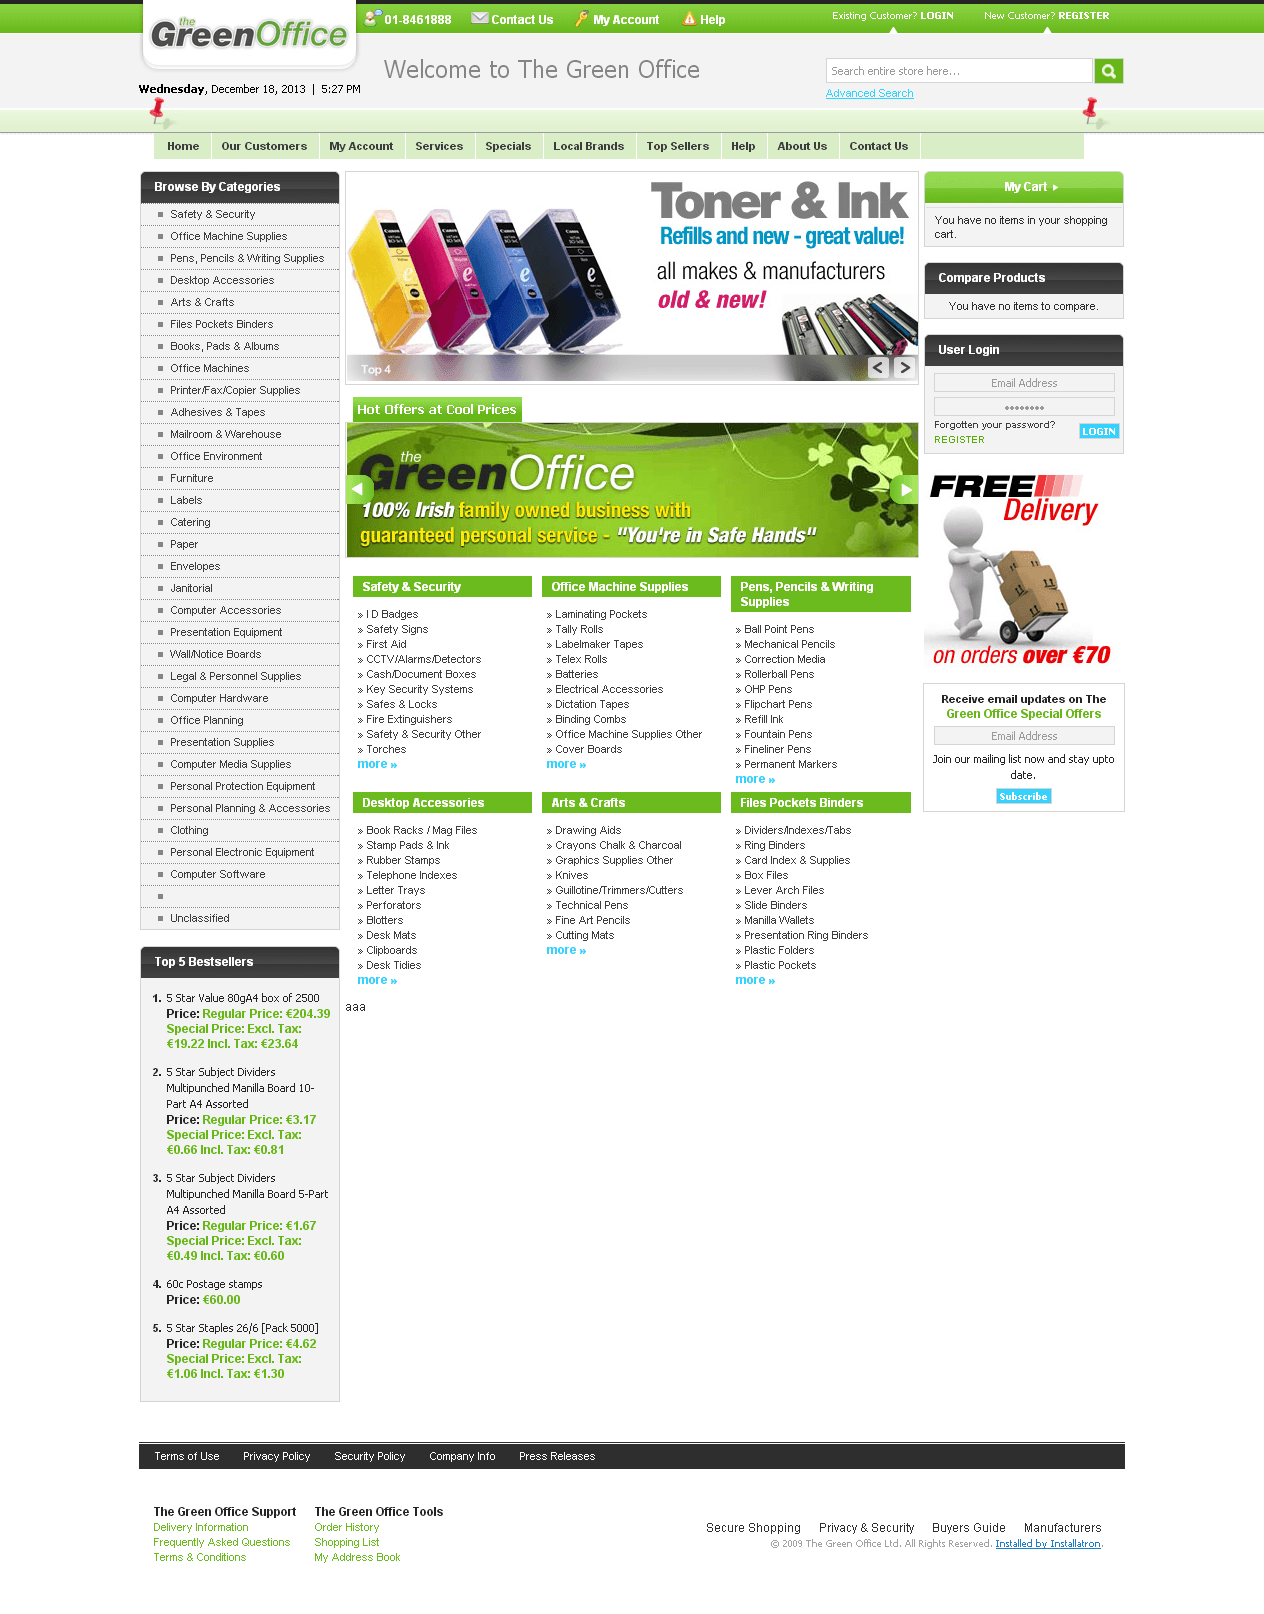  Magento Website for Online Stationary Products Seller 'GreenOffice'